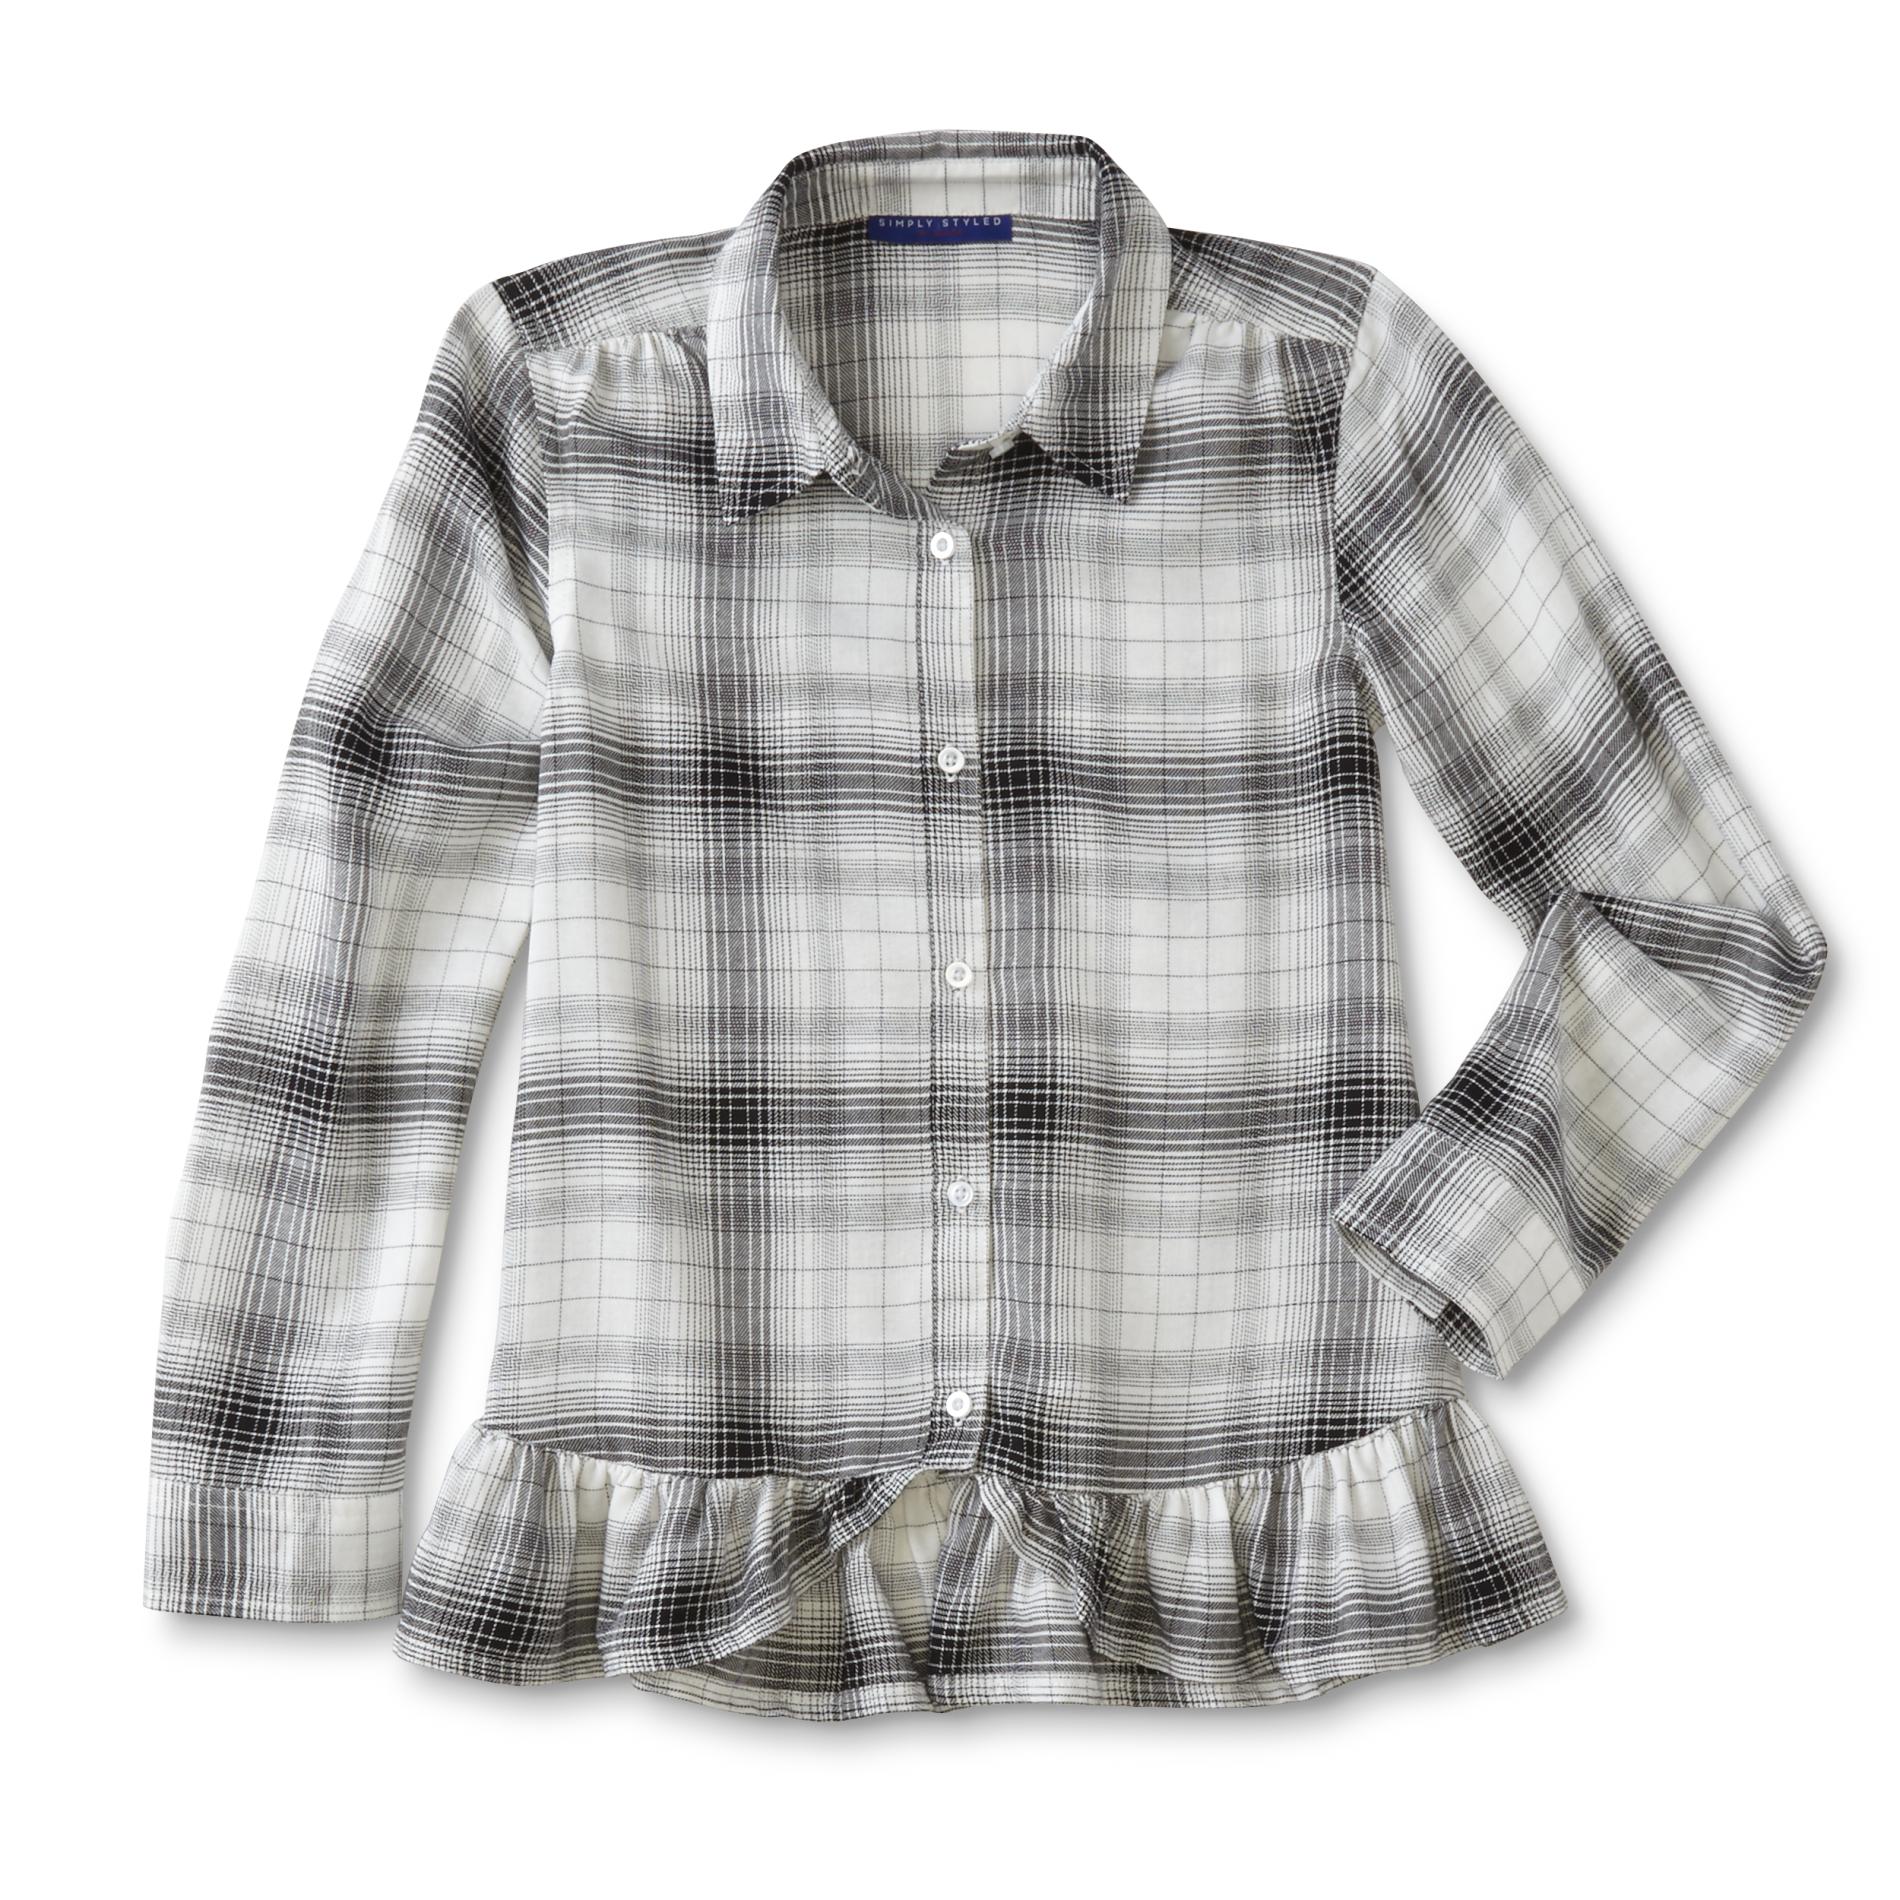 Simply Styled Girls' Button-Front Shirt - Plaid